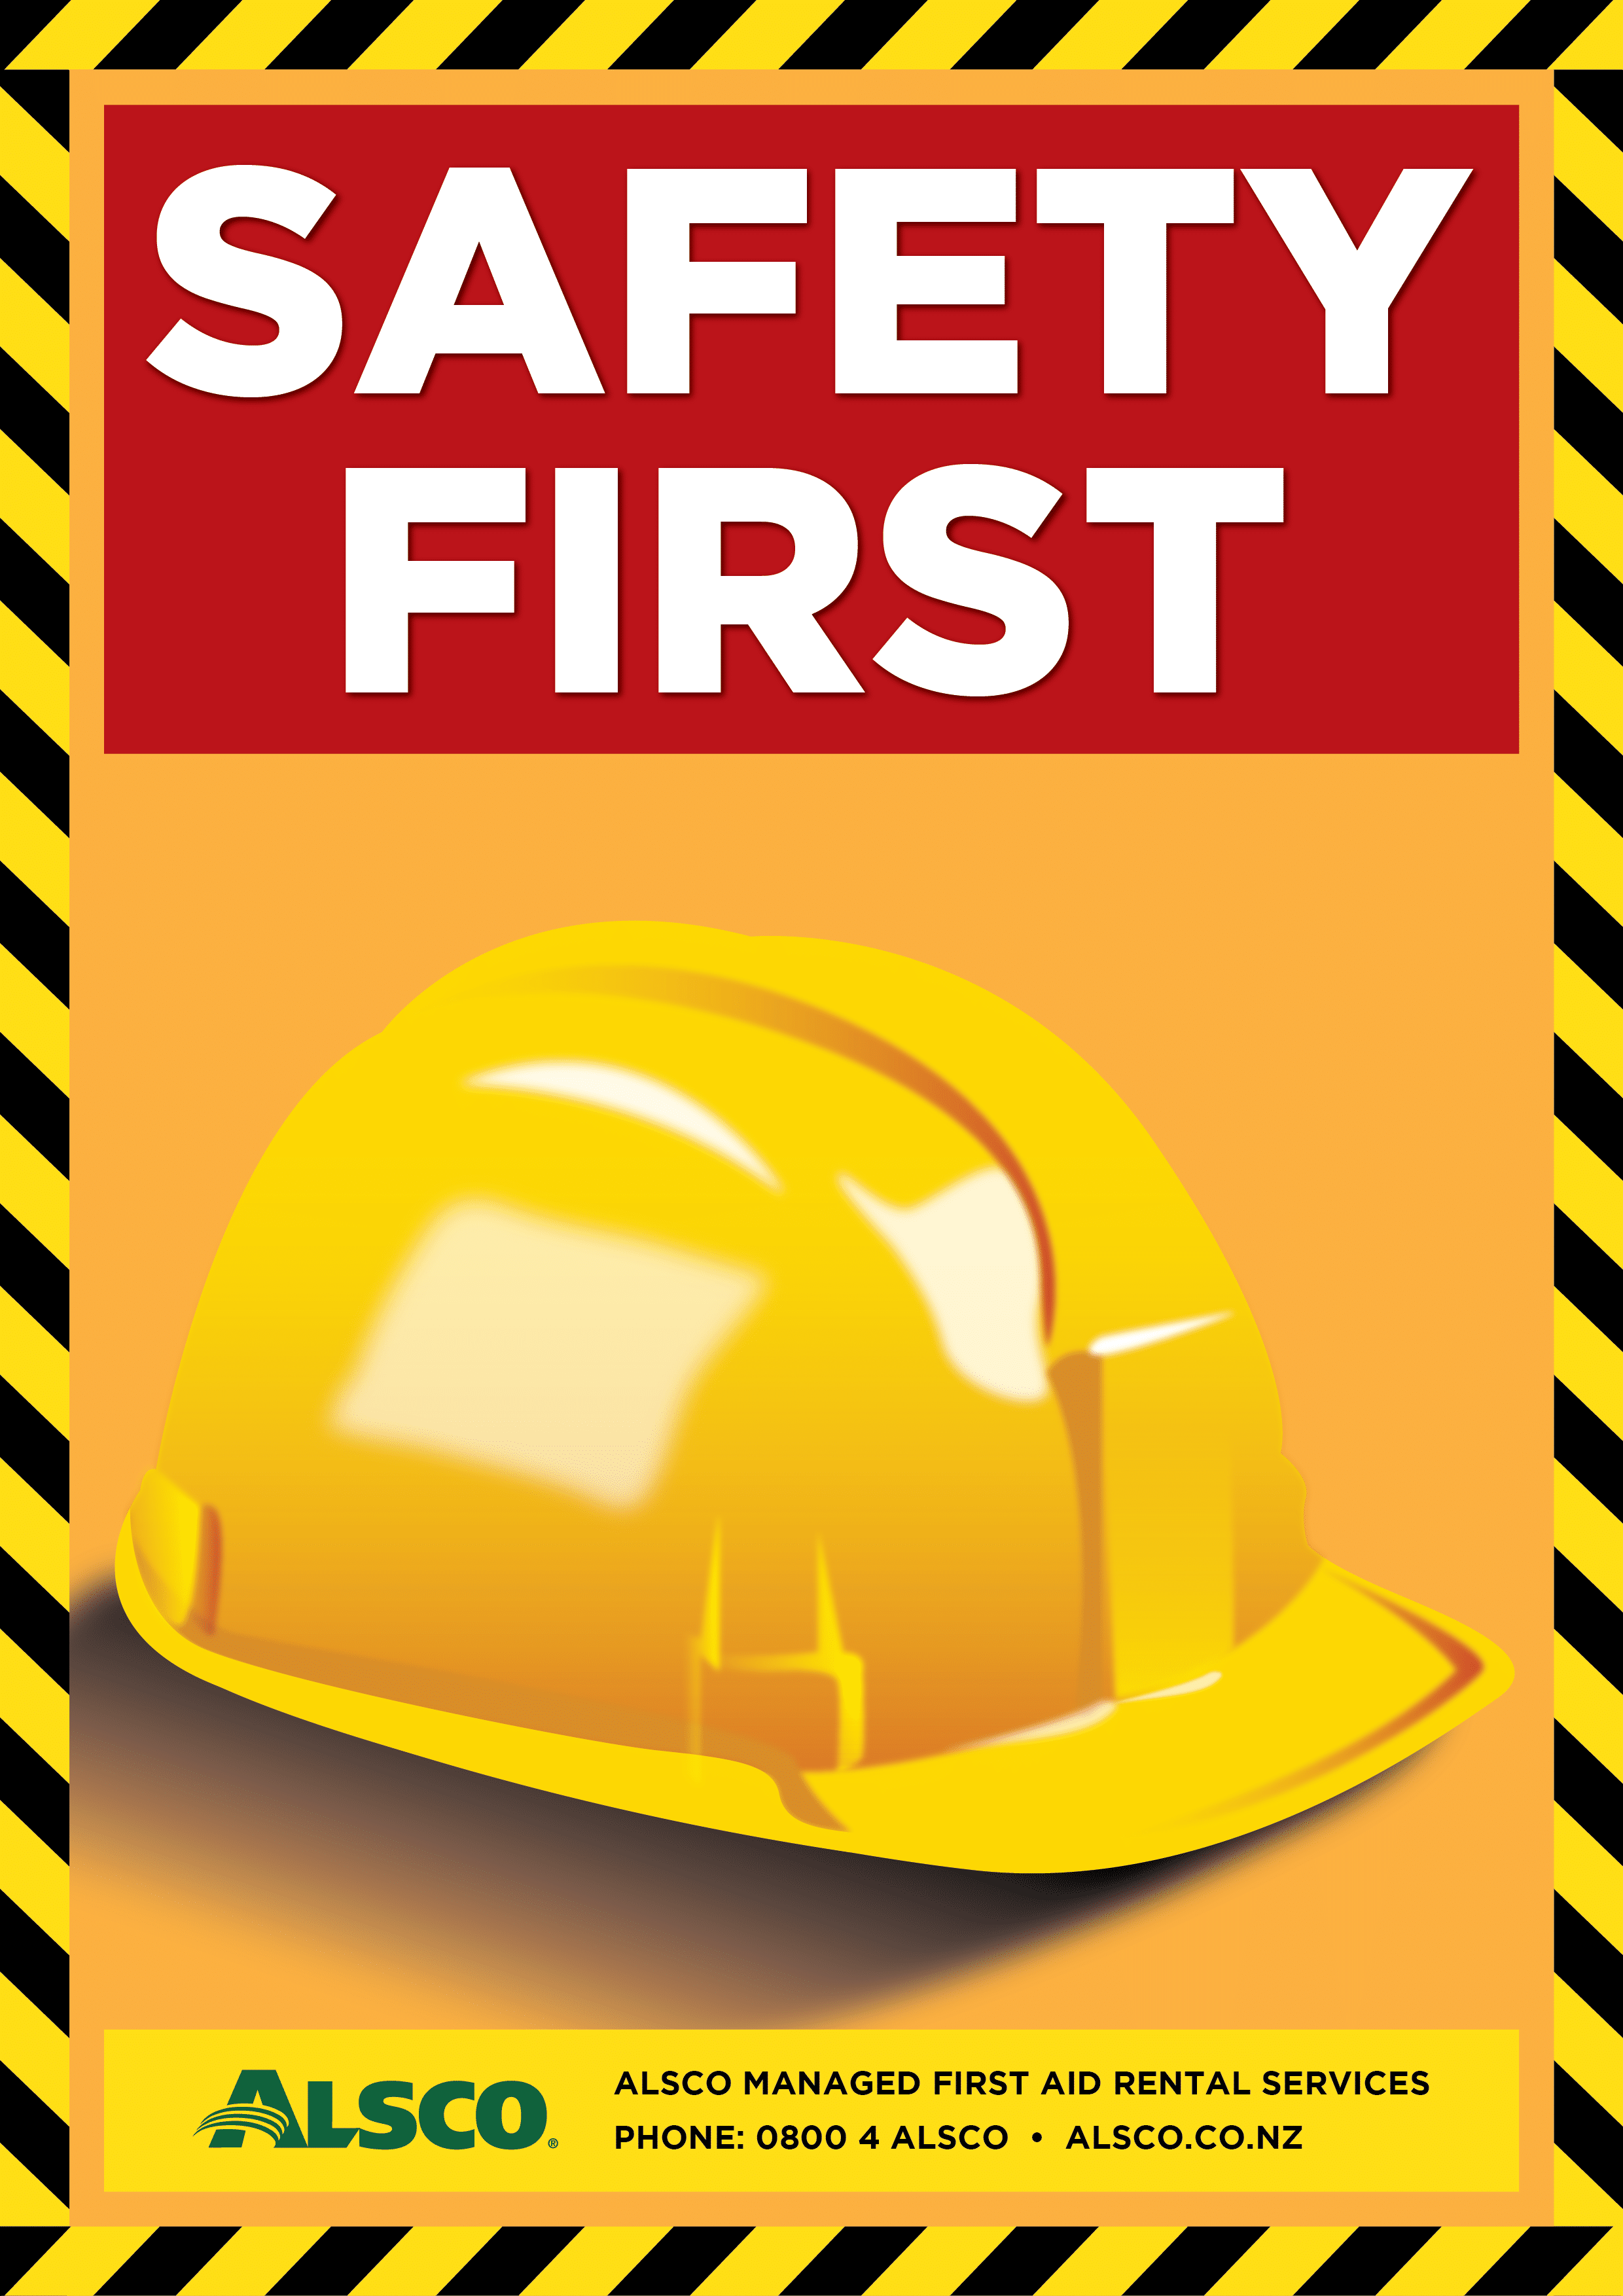 Construction Safety Posters Free Download